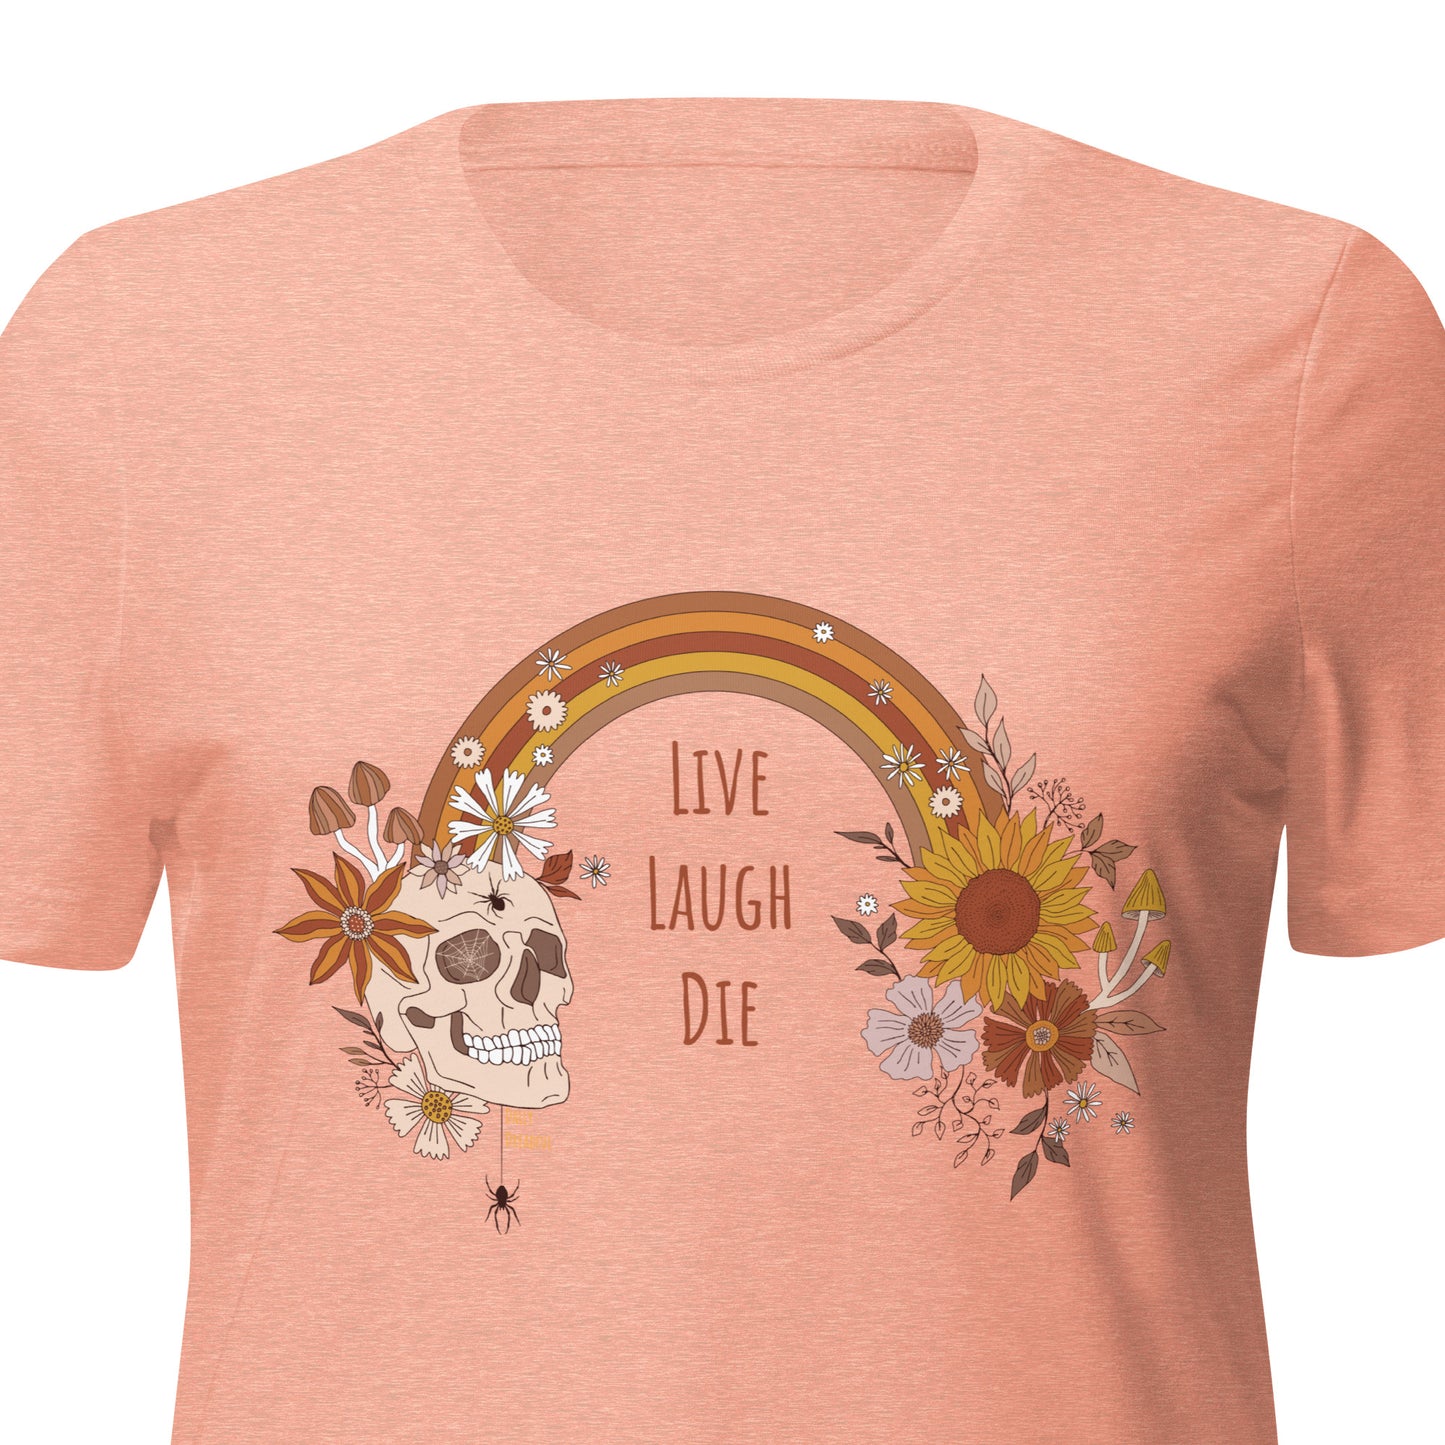 "Live, Laugh, Die" relaxed tri-blend t-shirt, sunset colored tee